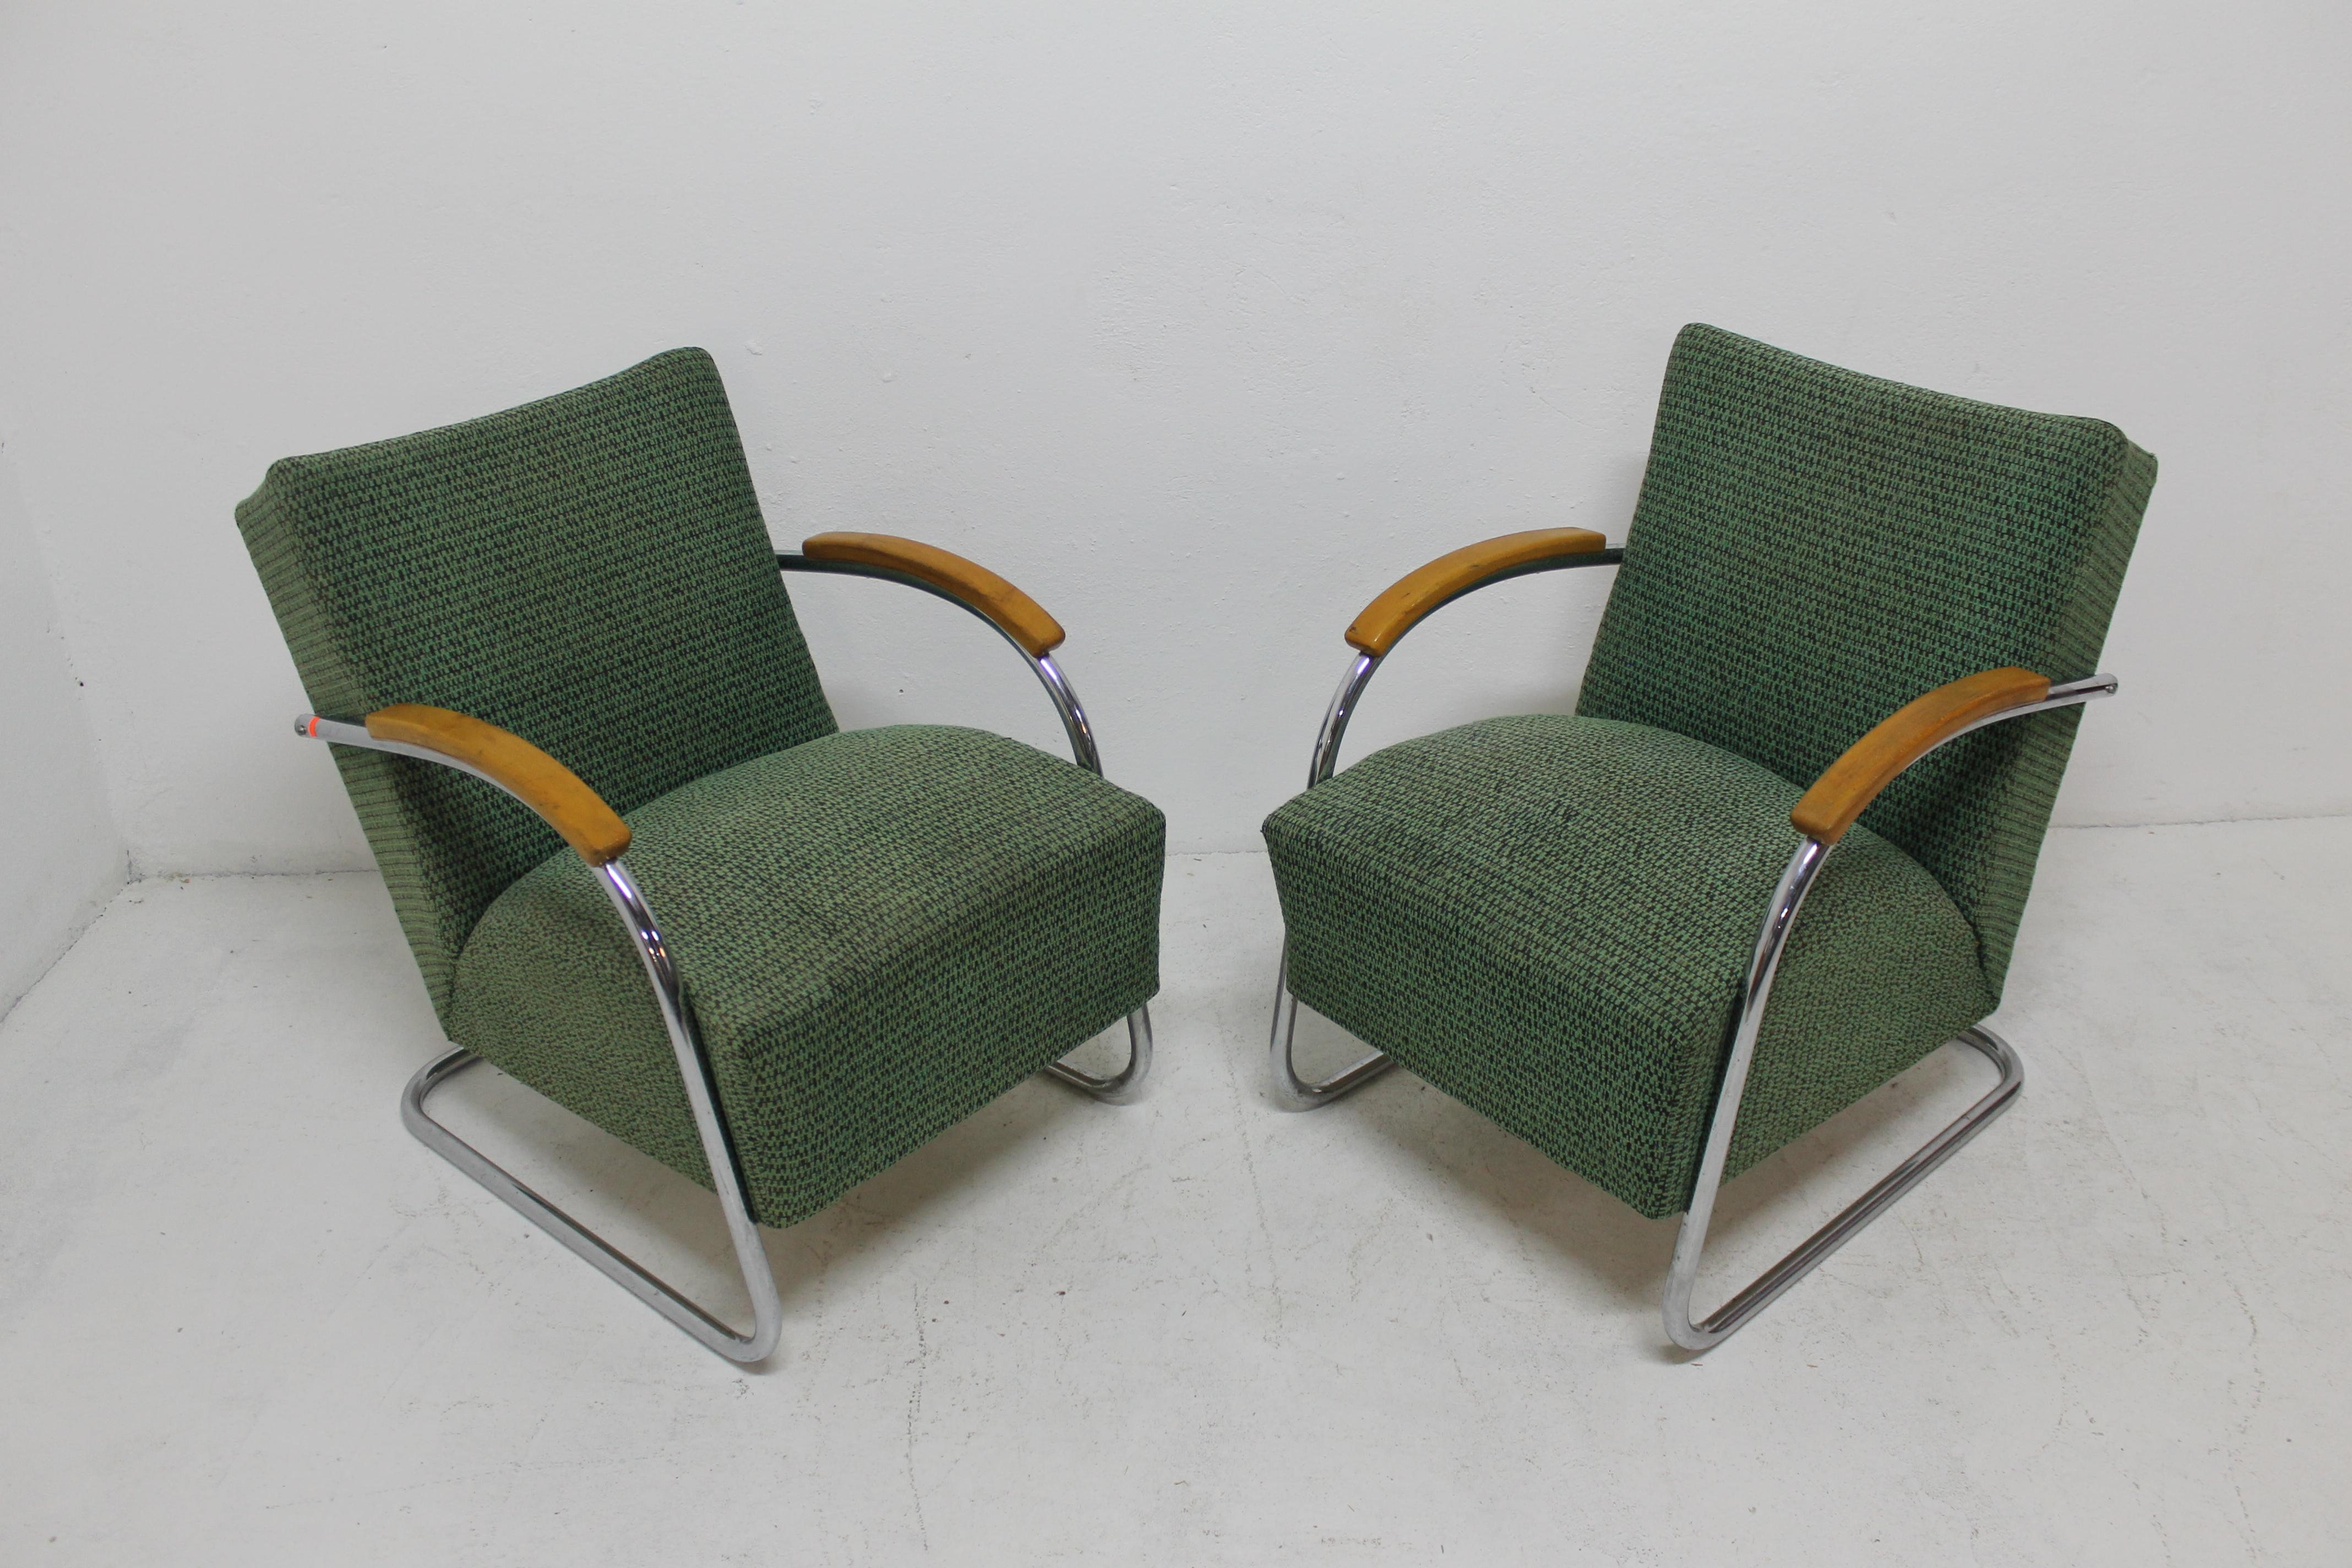 These tubular armchairs were manufactured in the 1950s by Kovona Company in the former Czechoslovakia.
Basically it is Marcel Breuer's original design, but later acquired by Anton Lorenz in a patent dispute for Thonet Company.
In the Czech